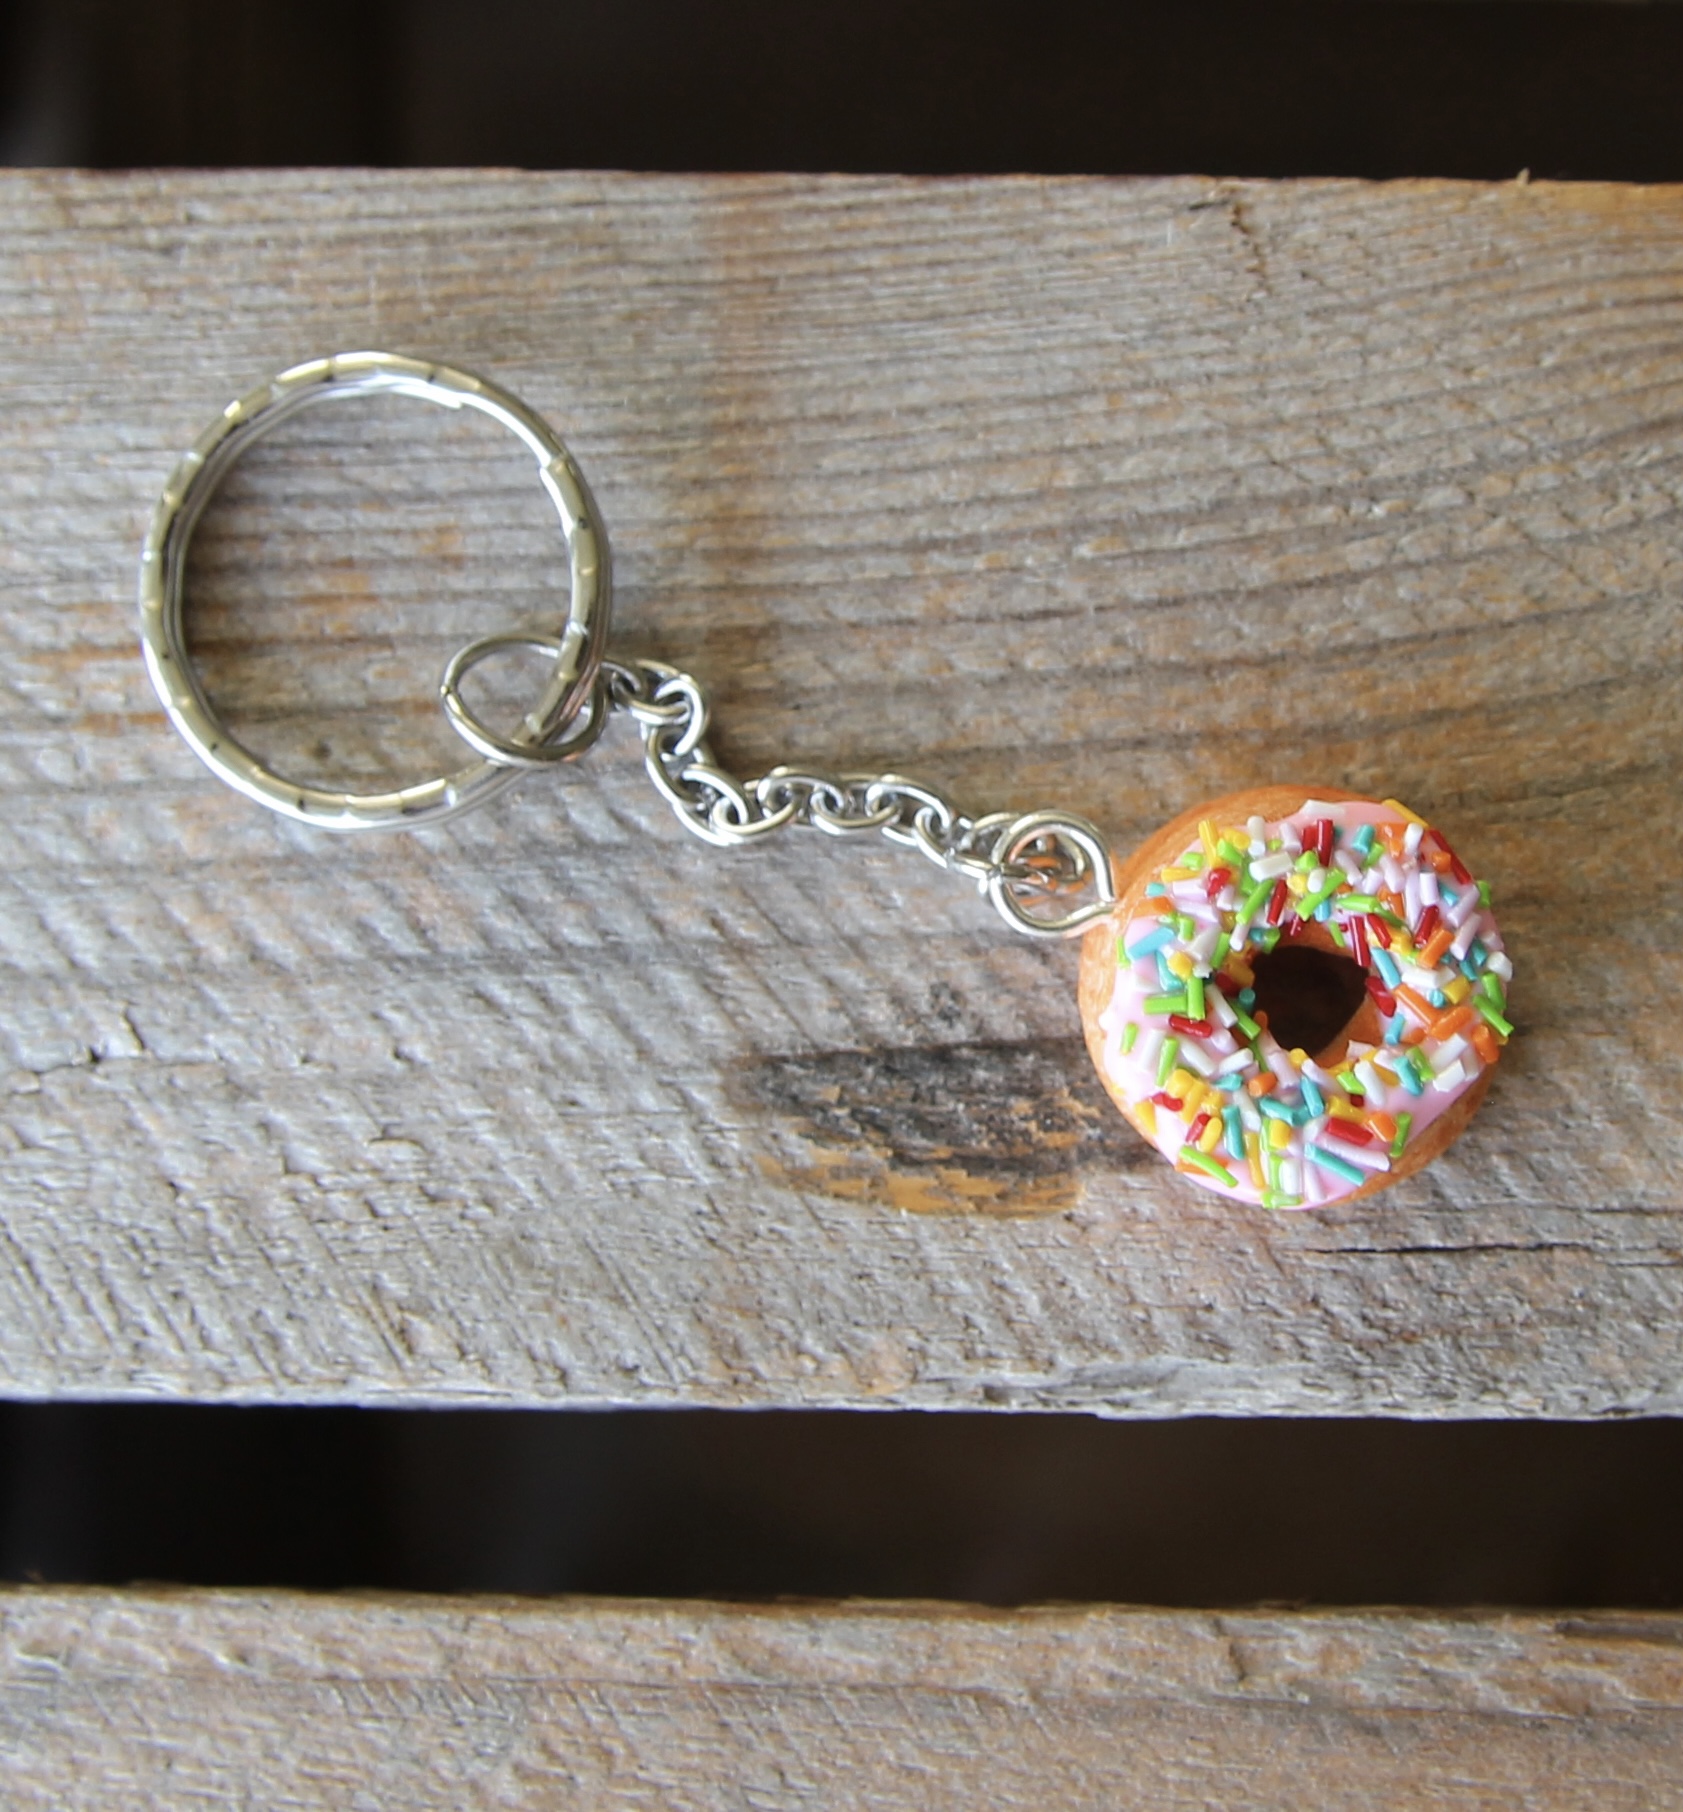 Keychain, donut with pink icing and sprinkles